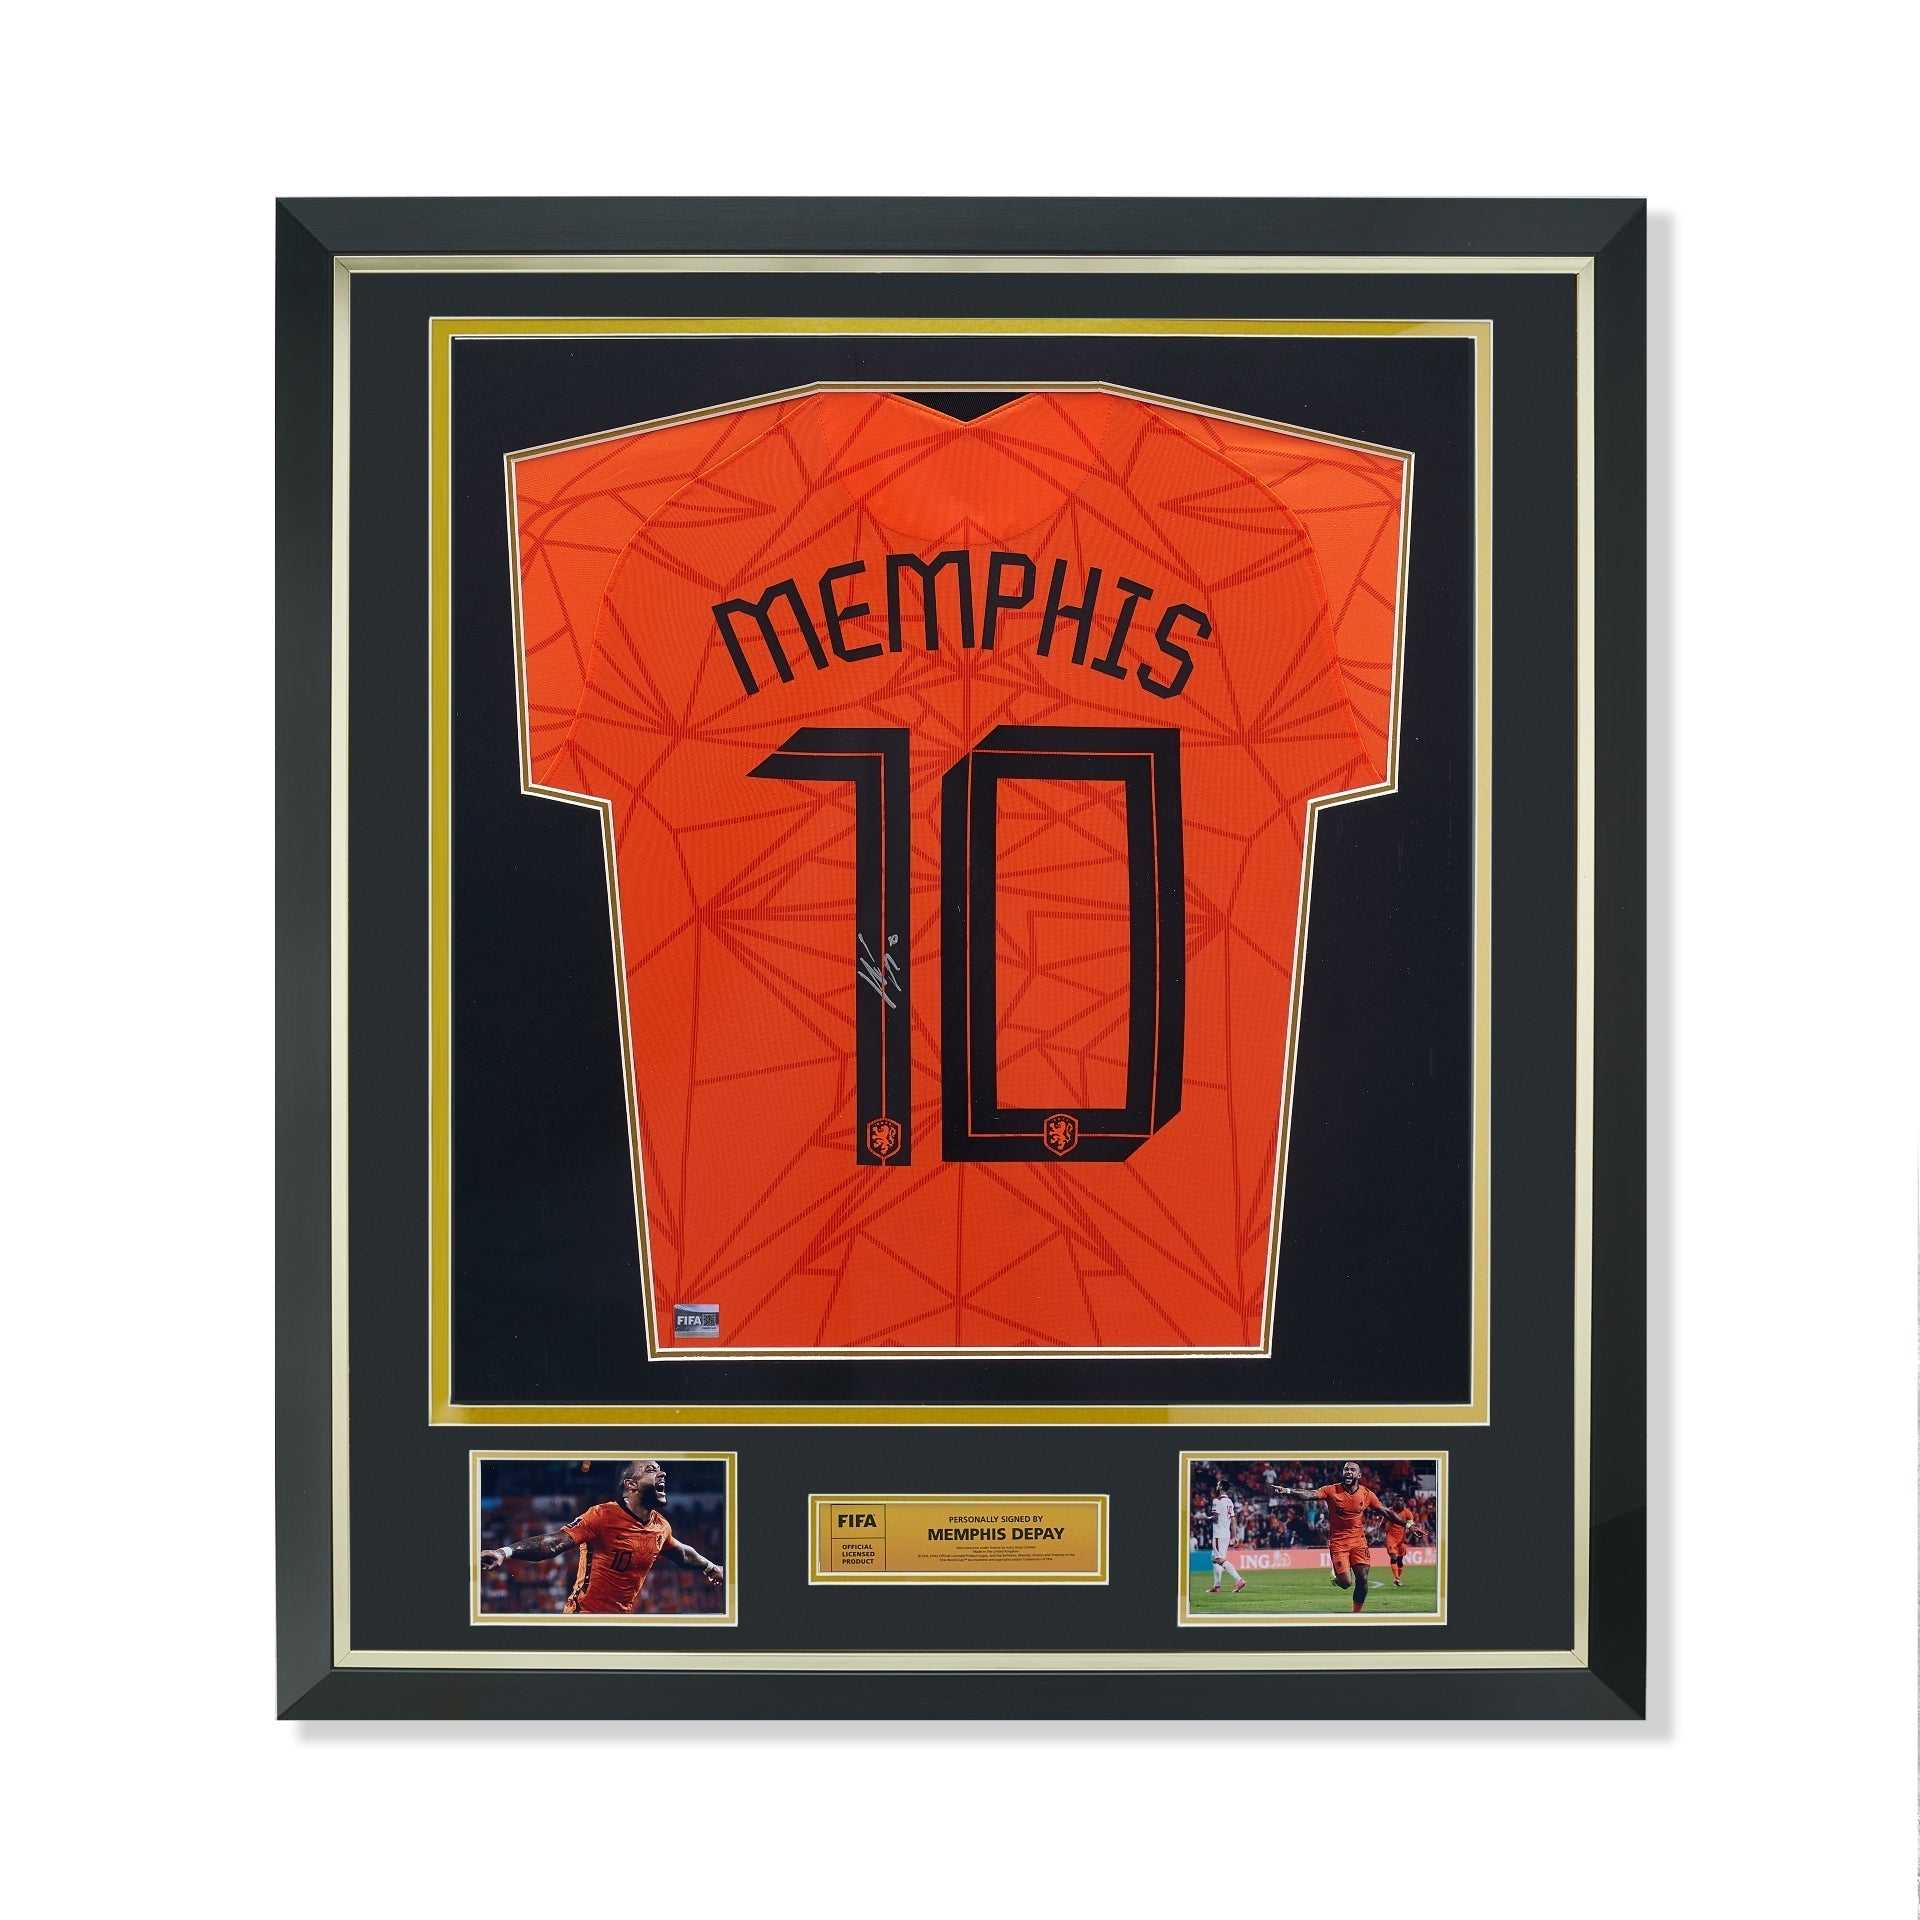 FIFA World Cup Memphis Depay Official Signed And Framed Netherlands 2020-21 Home Shirt